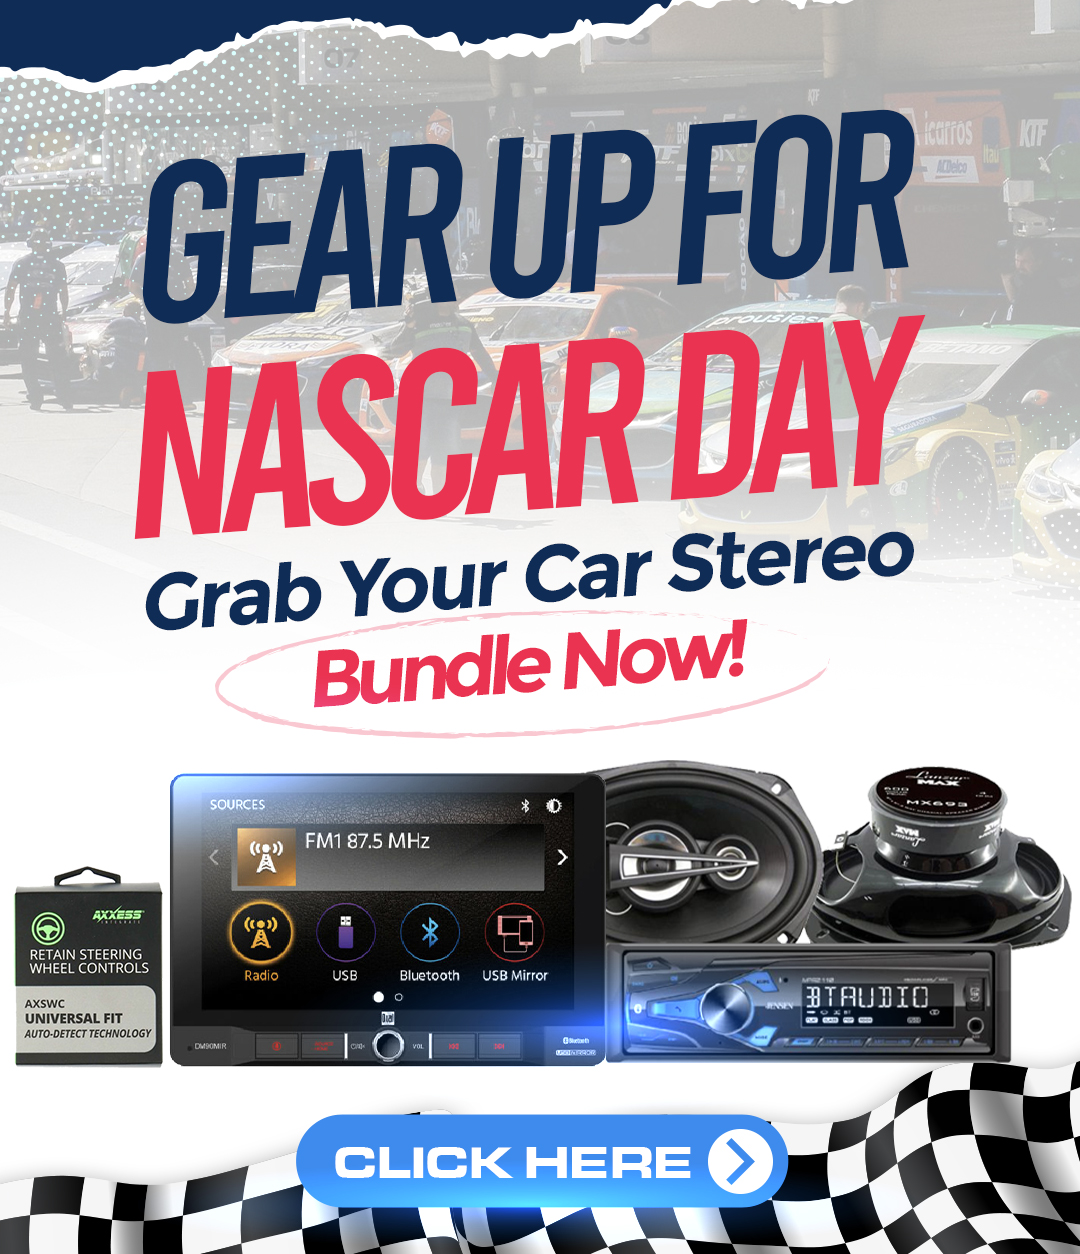 Gear Up for NASCAR Day: Grab Your Car Stereo Bundle Now!